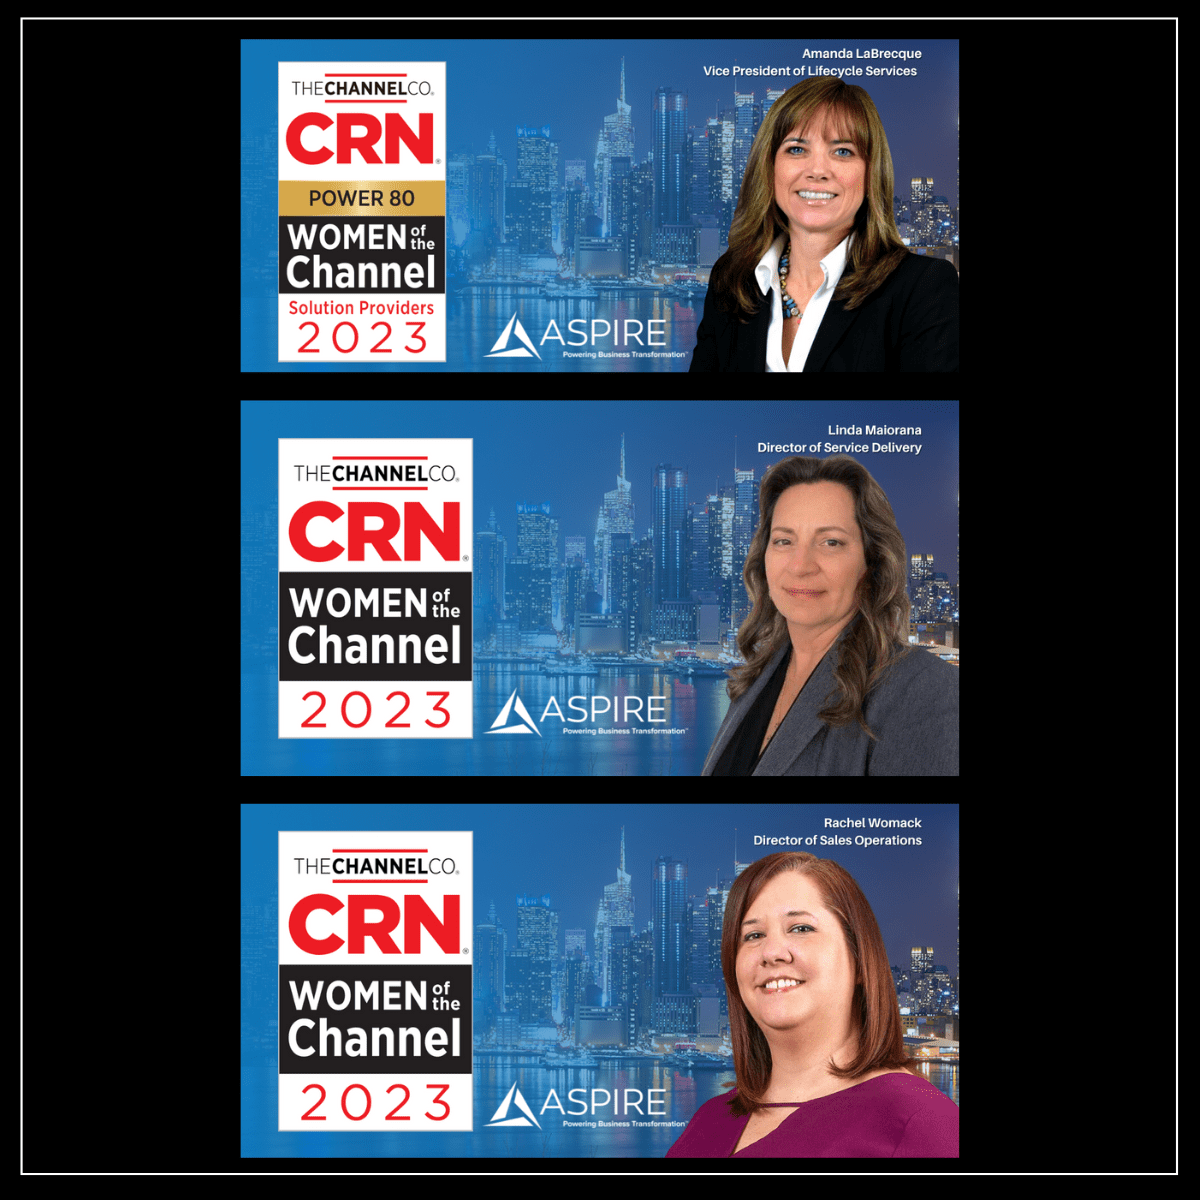 Aspire Technology Partners Announces Three Executives Honorees in CRN 2023 Women of the Channel List: Amanda LaBrecque, Linda Maiorana and Rachel Womack Featured Image